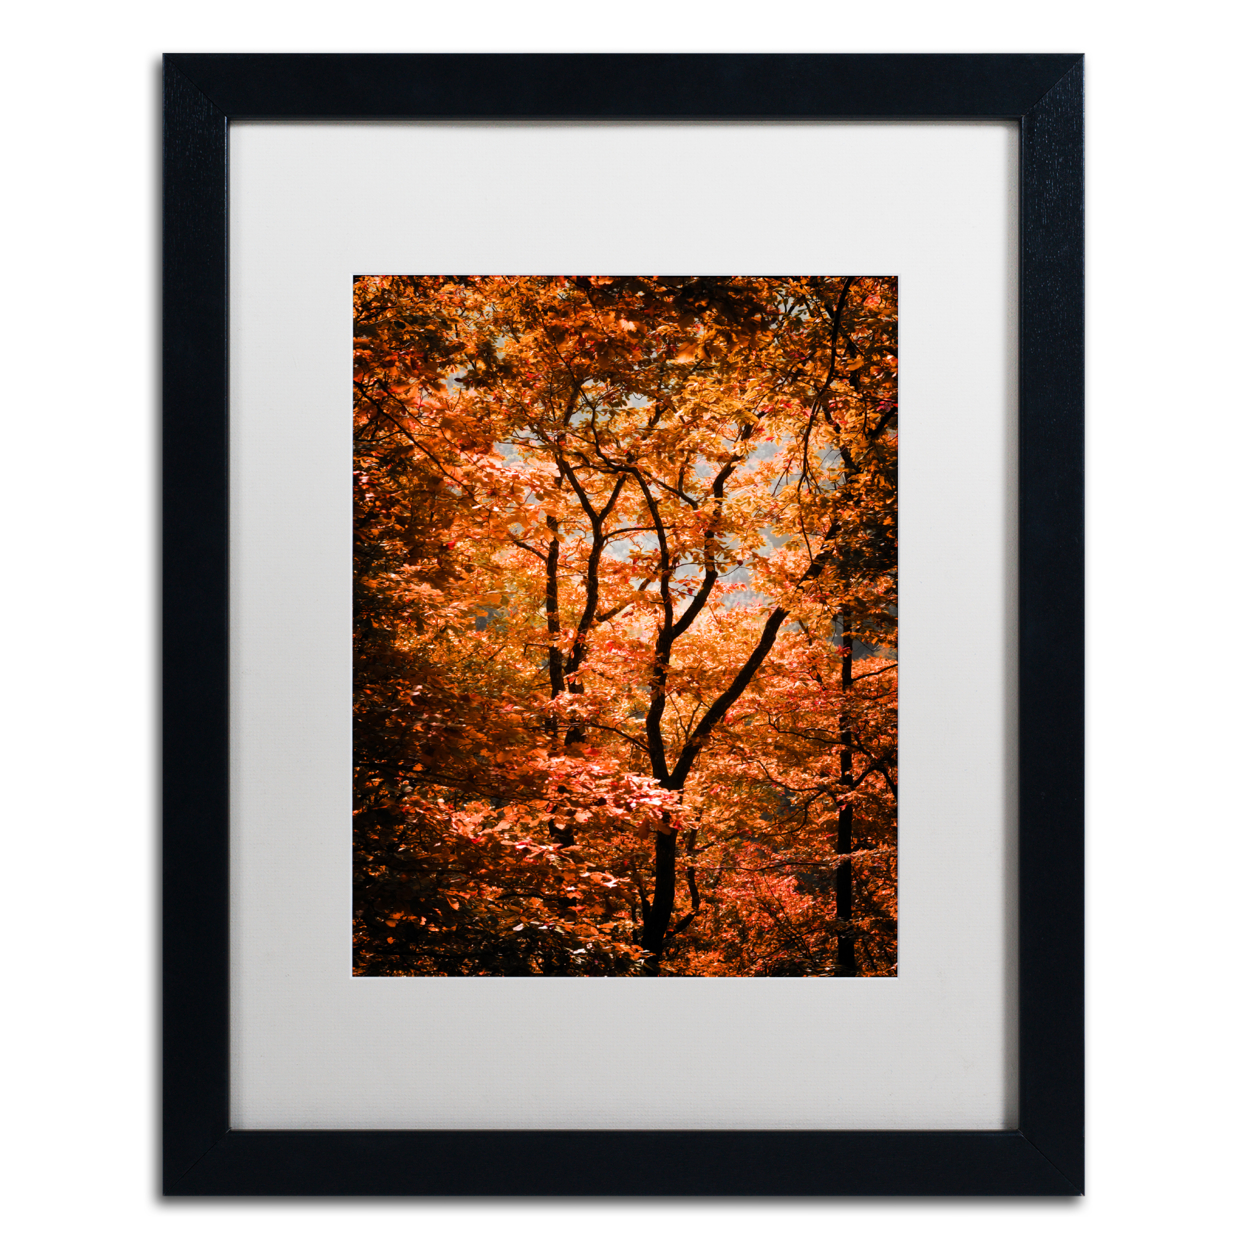 Philippe Sainte-Laudy 'Autumn Whispers' Black Wooden Framed Art 18 X 22 Inches